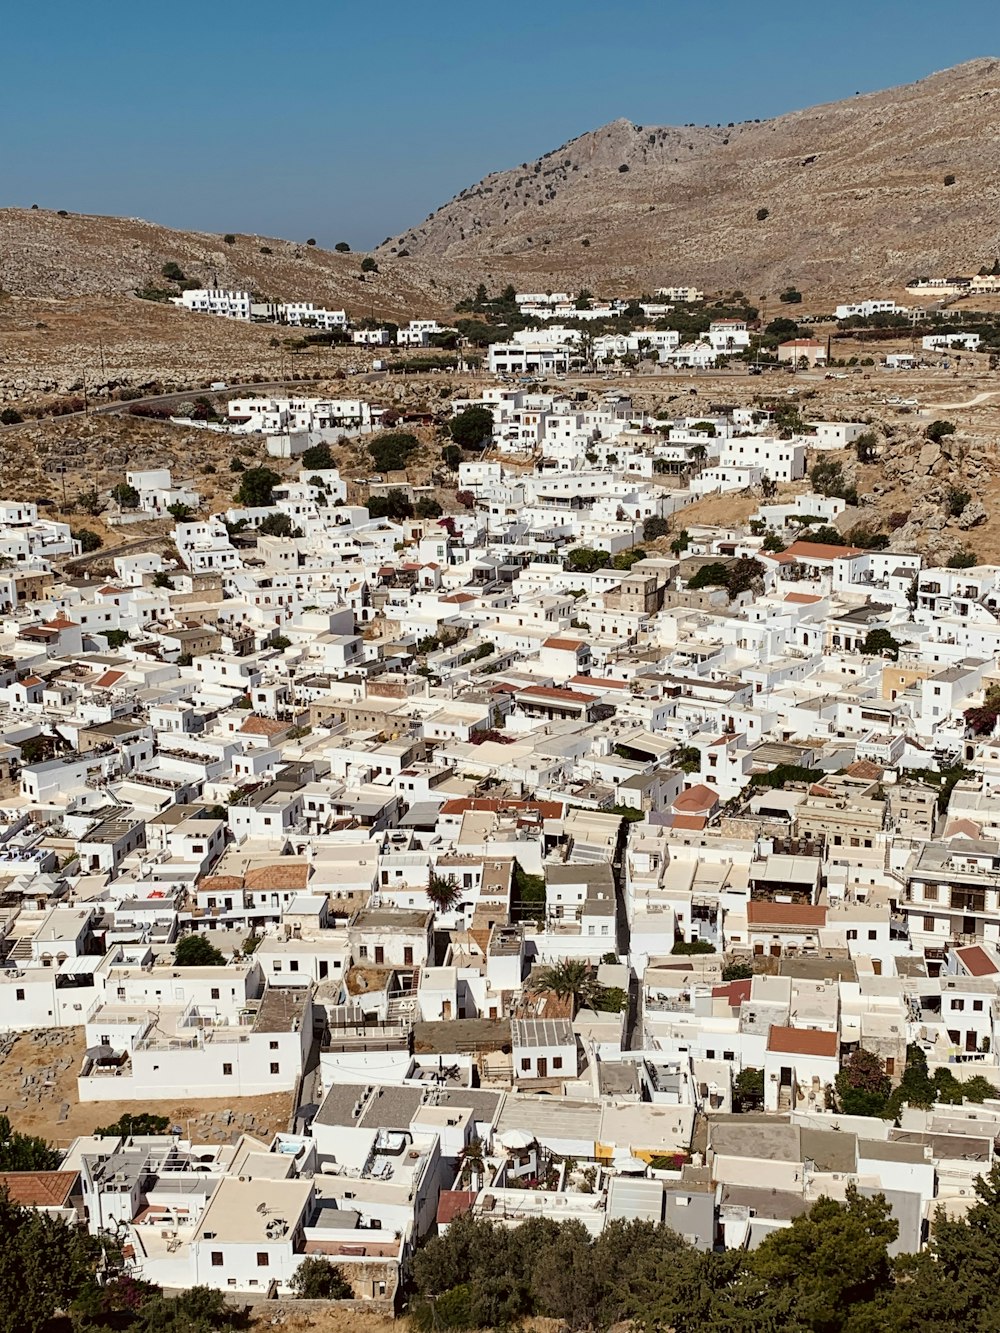 a view of a town in the middle of the desert